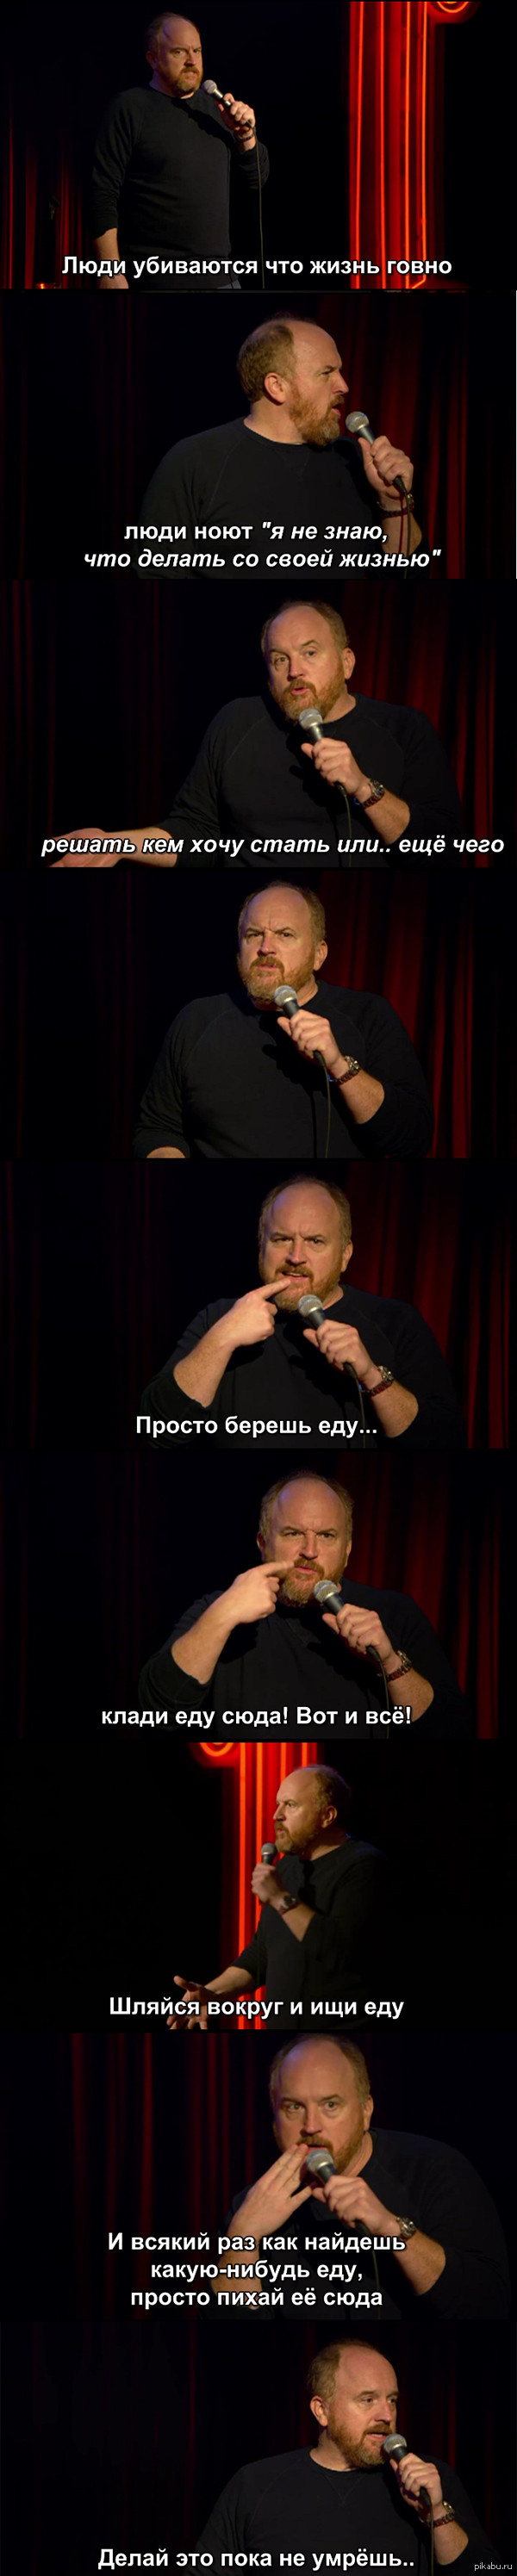    Louis C.K. - Live at the Comedy Store.      